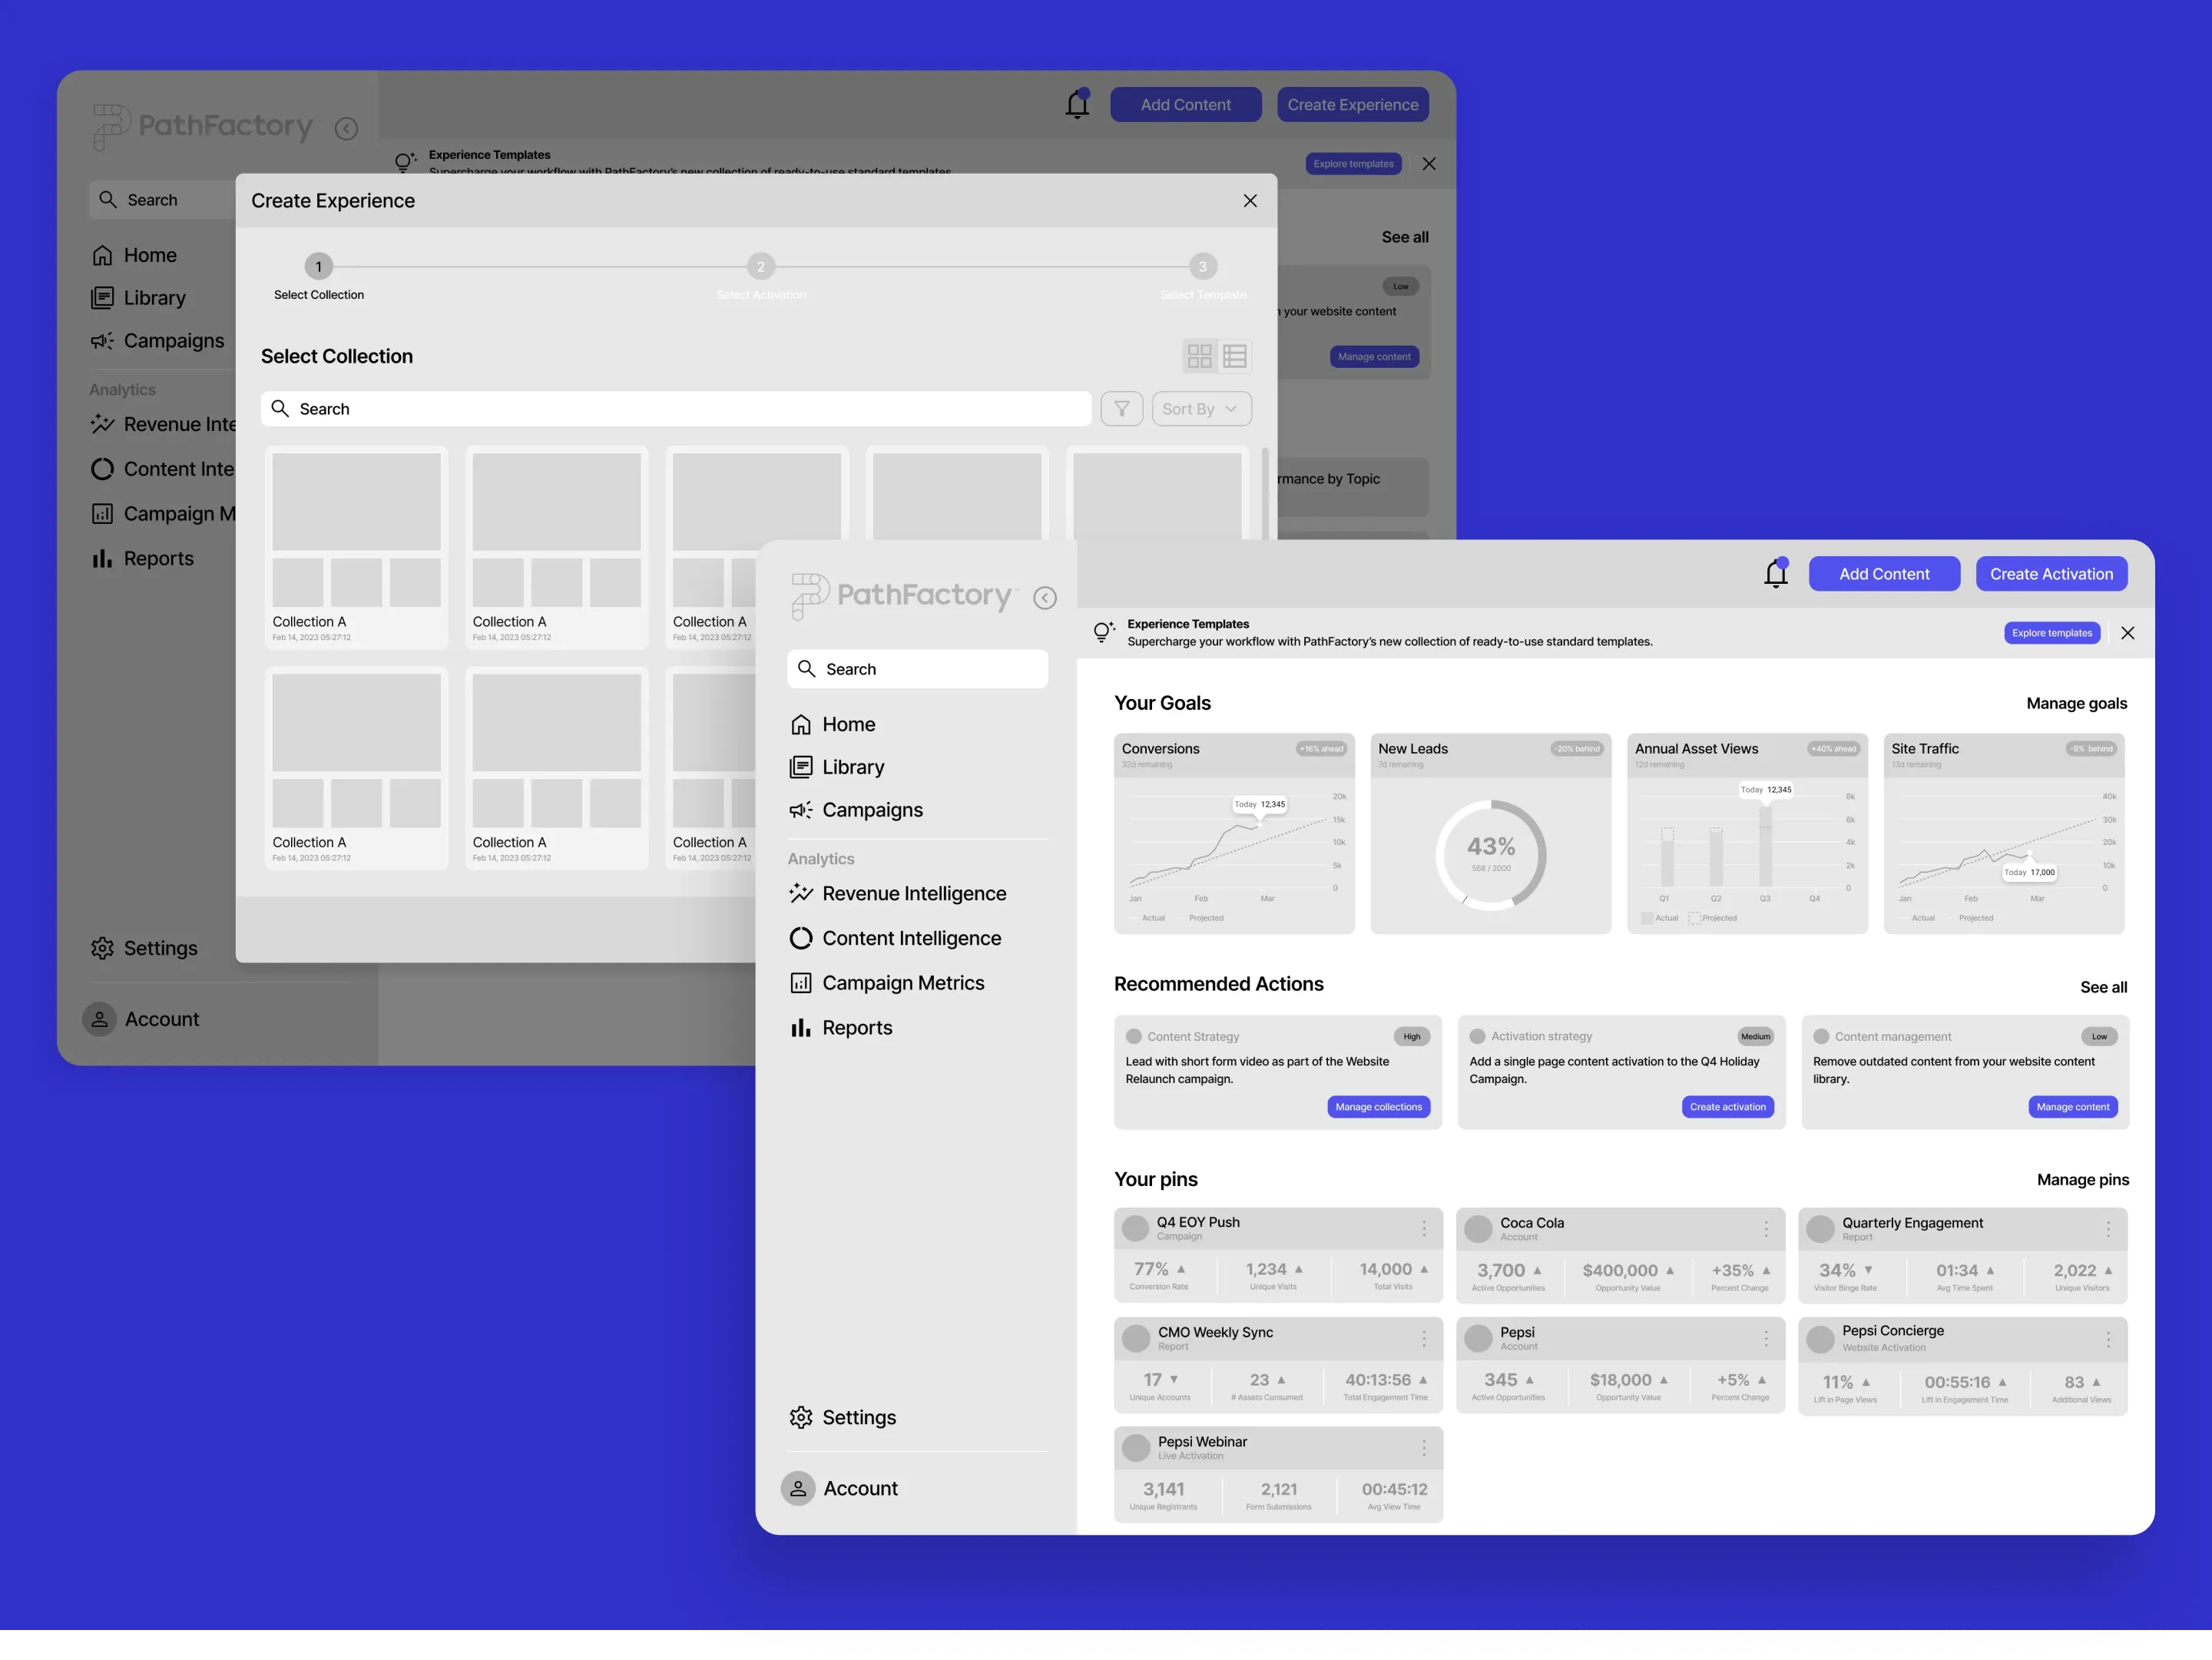 sam-small-design-pathfactory-case-study-core-experience-wireframe-screens-v01